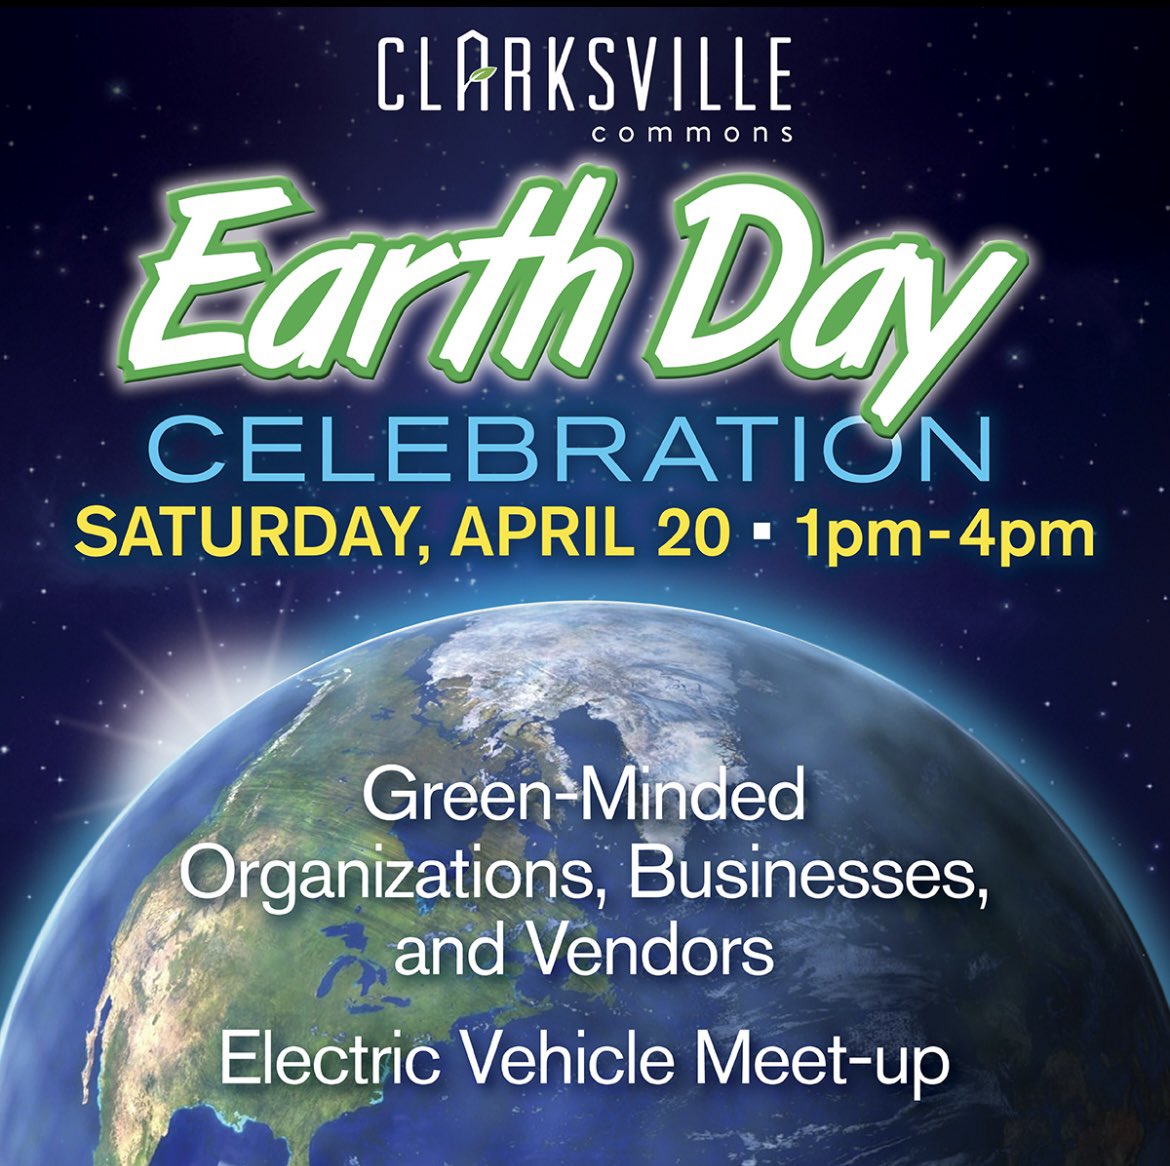 Ready to kick off a pre-Earth Day weekend? 🌎 Stop by the Clarksville Earth Day Celebration tomorrow from 1pm - 4pm! We’ll be ready to electrify your day by showing you how to save energy and save the planet with our energy programs 💡✨